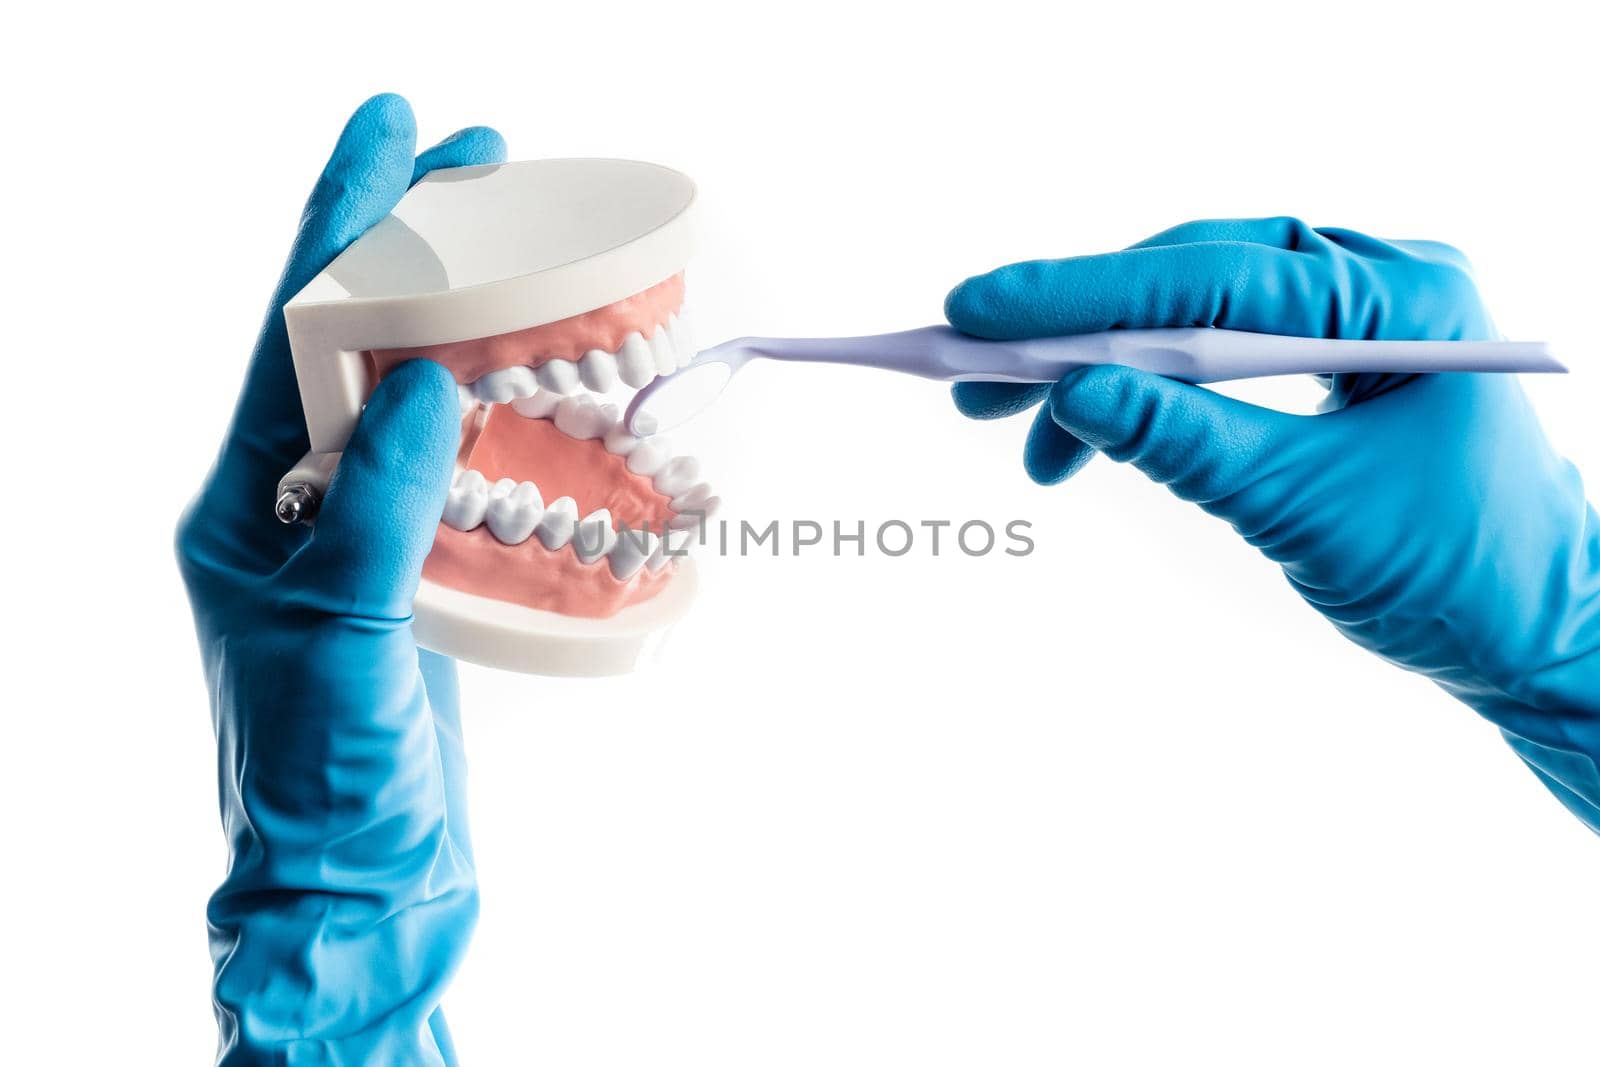 Hands in blue gloves examinating teeth model isolated on white background